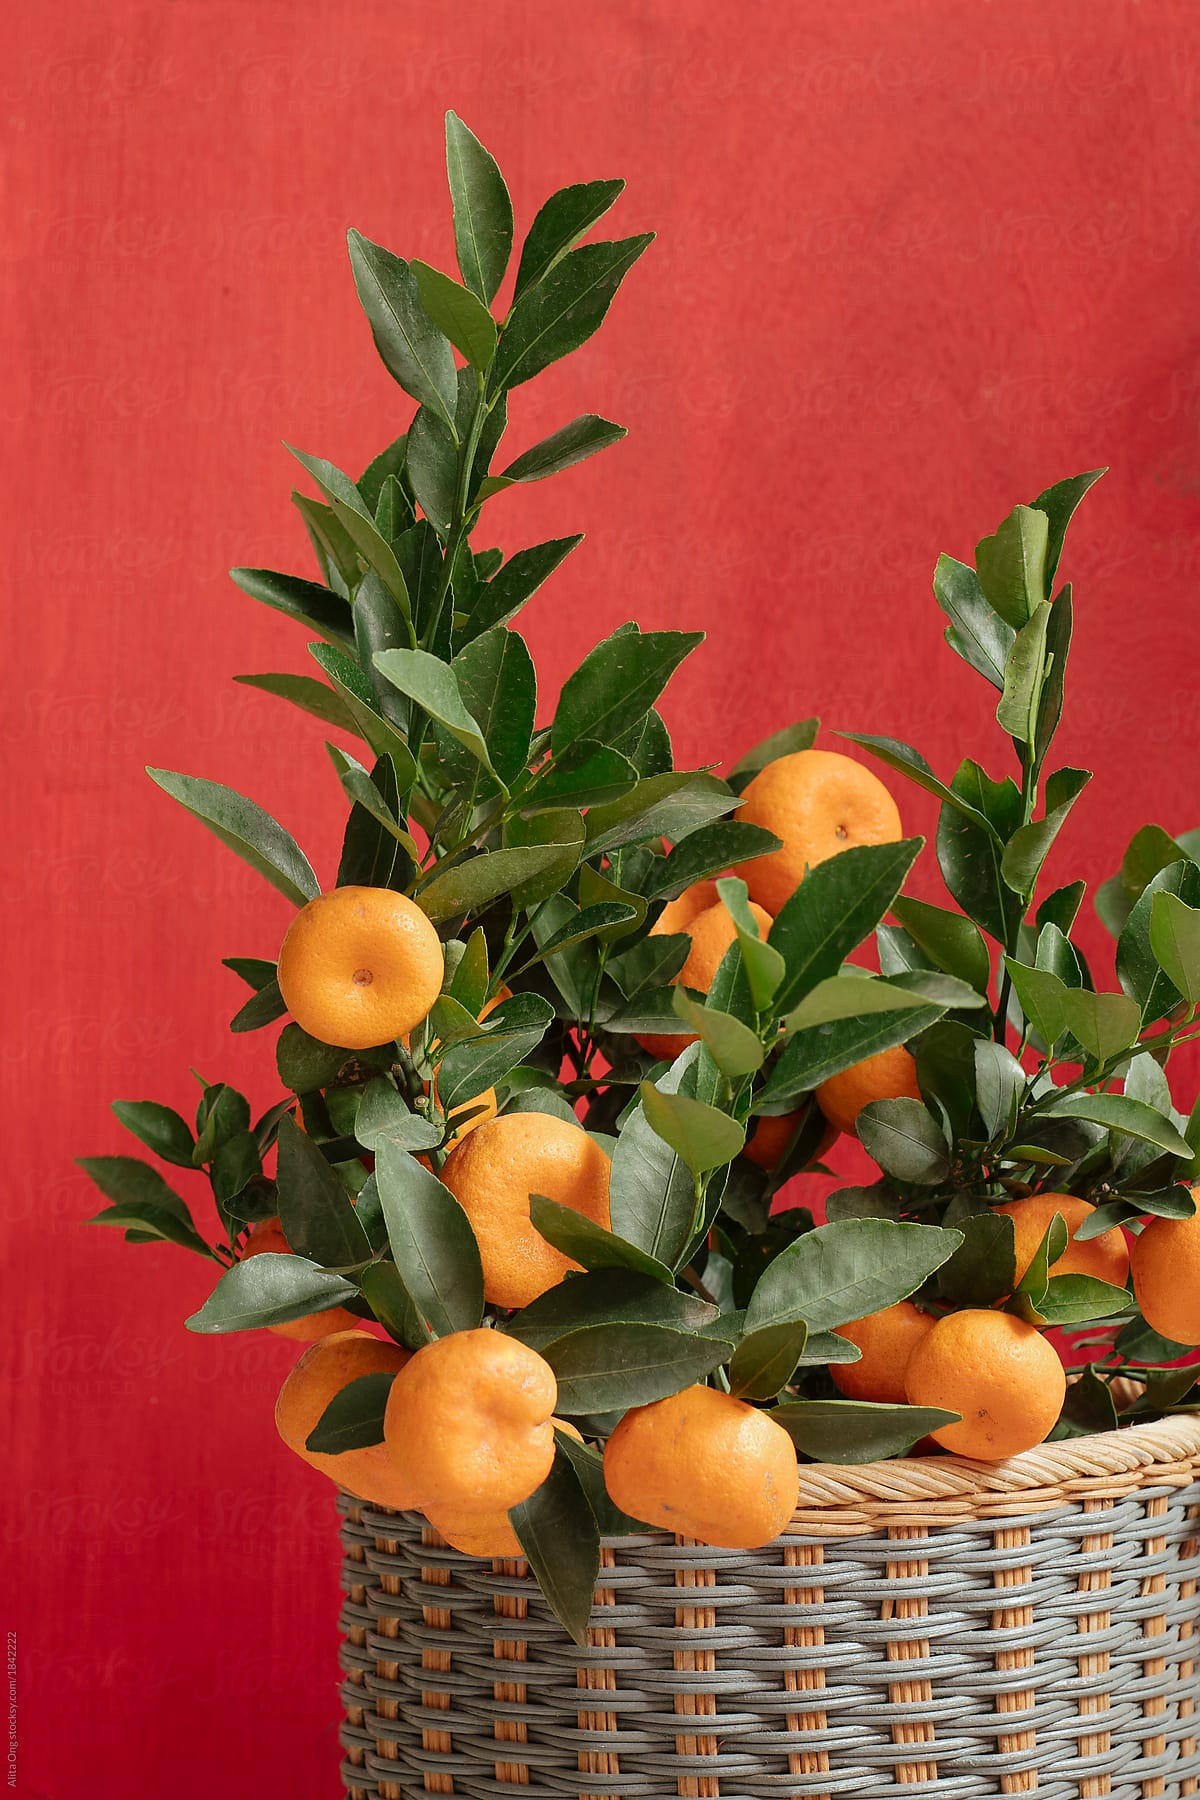 Potted orange tree with fruits